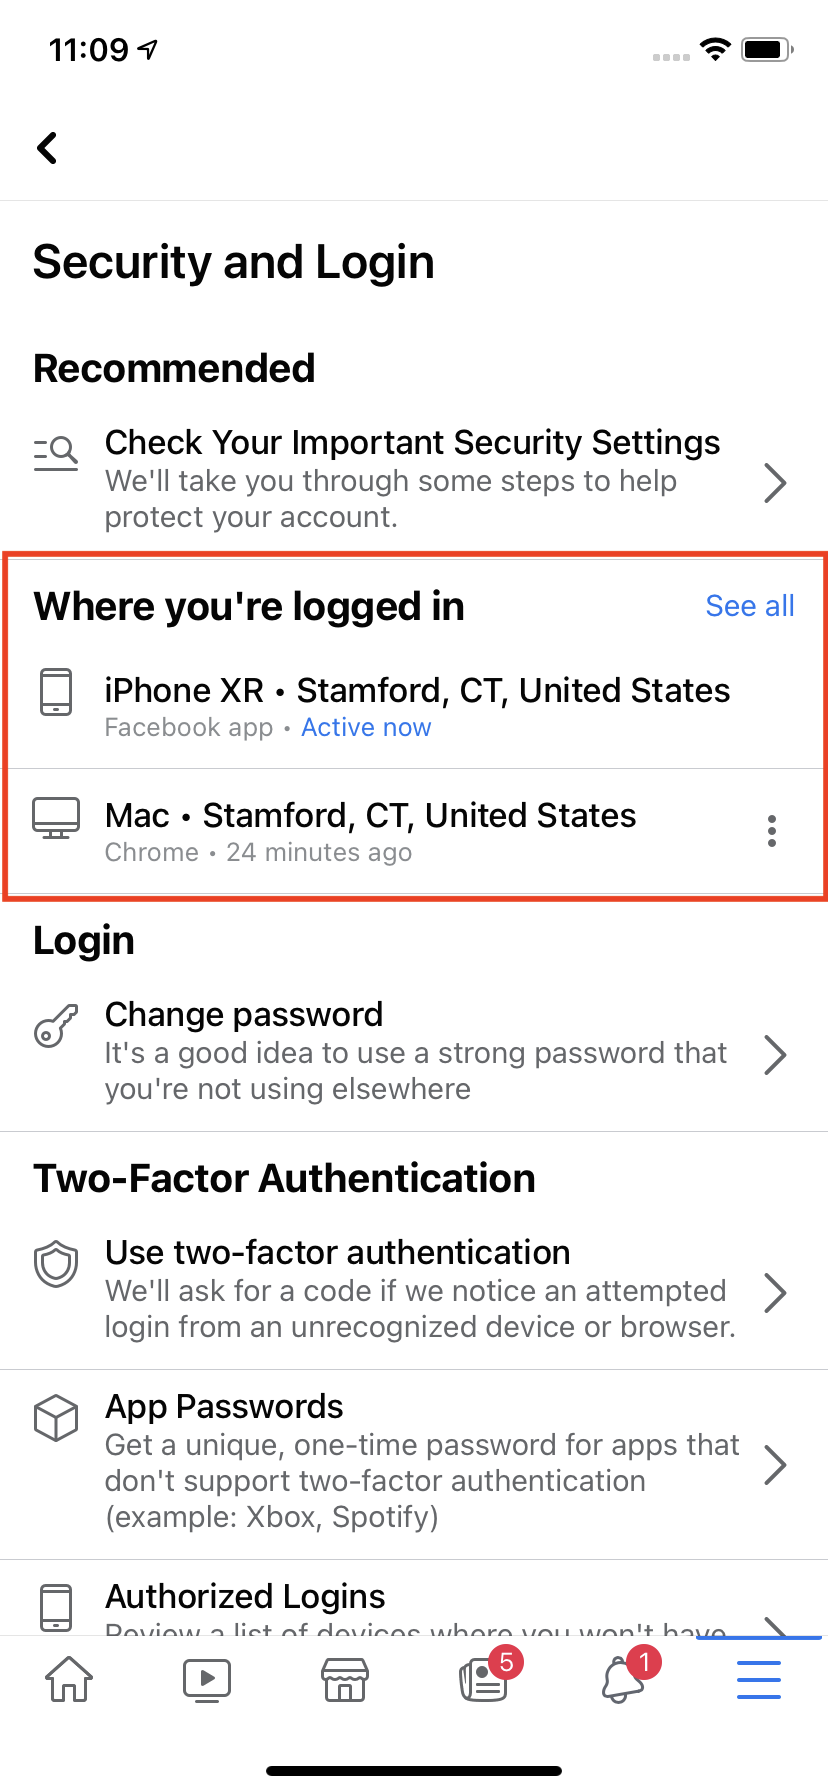 Failed Facebook Login Attempts Reveal Private Information - gHacks